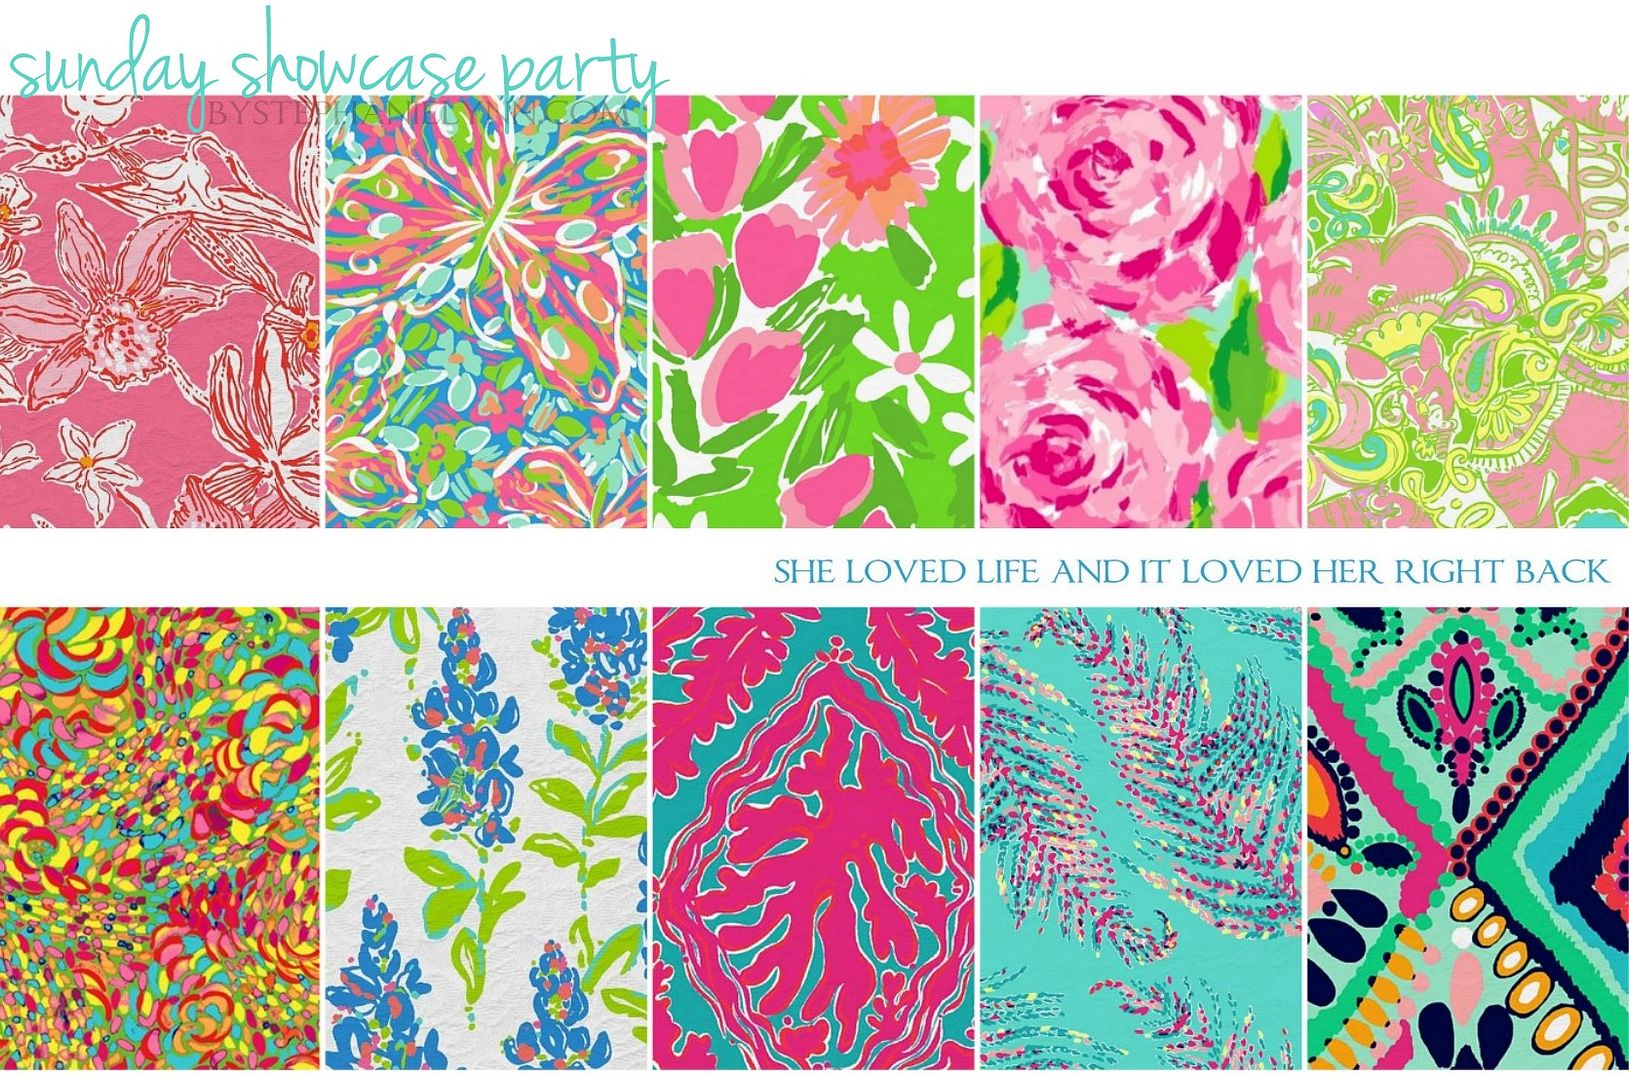 Lilly Pulitzer Prints